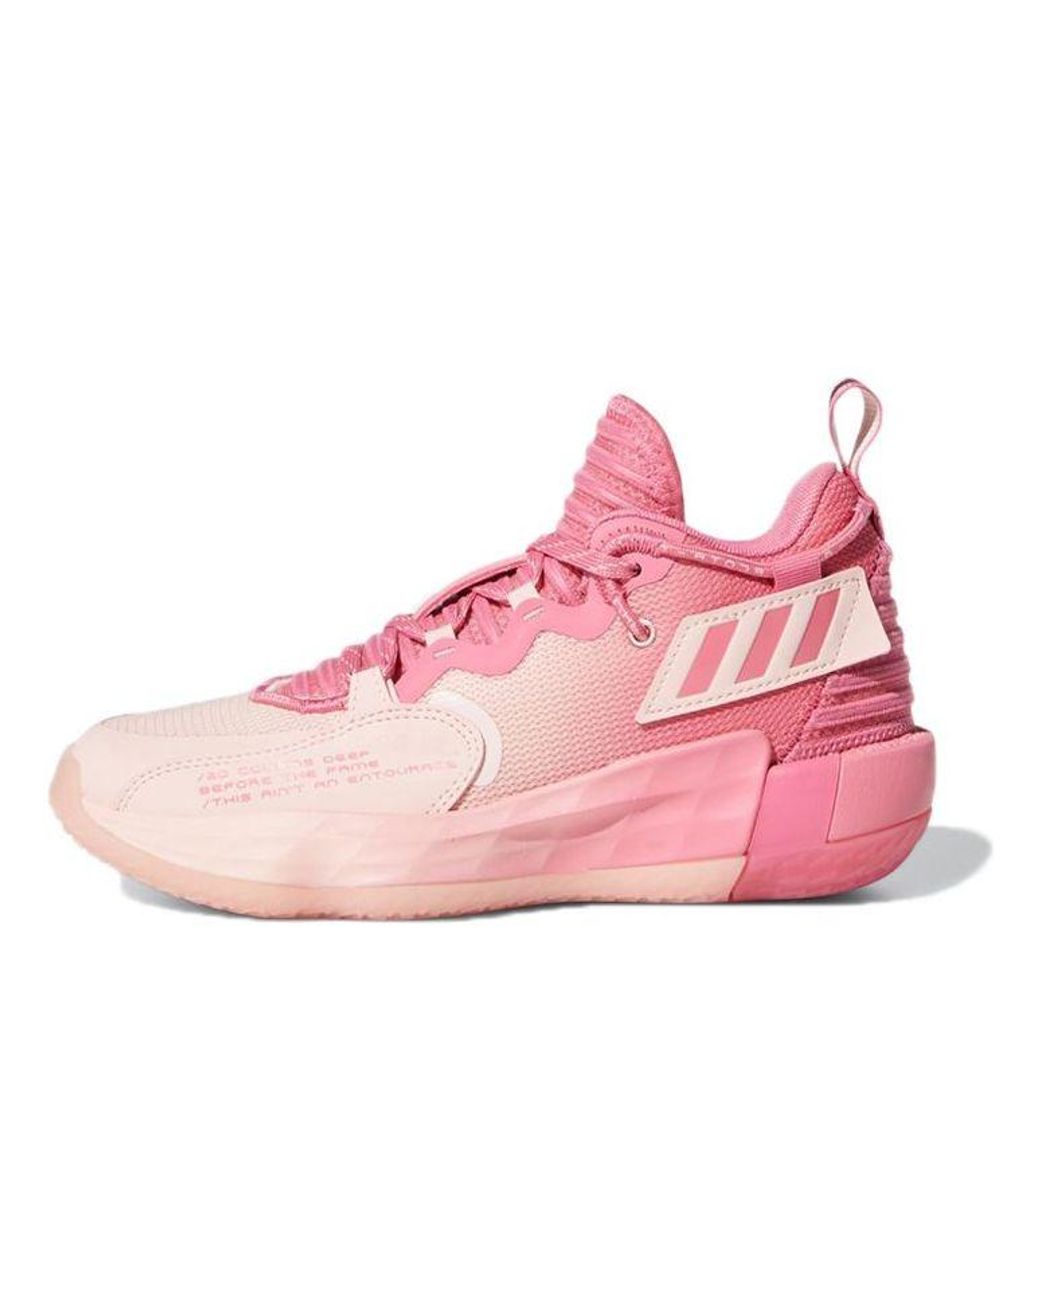 adidas Dame 7 Extply J 'd.o.l.l.a.' in Pink | Lyst